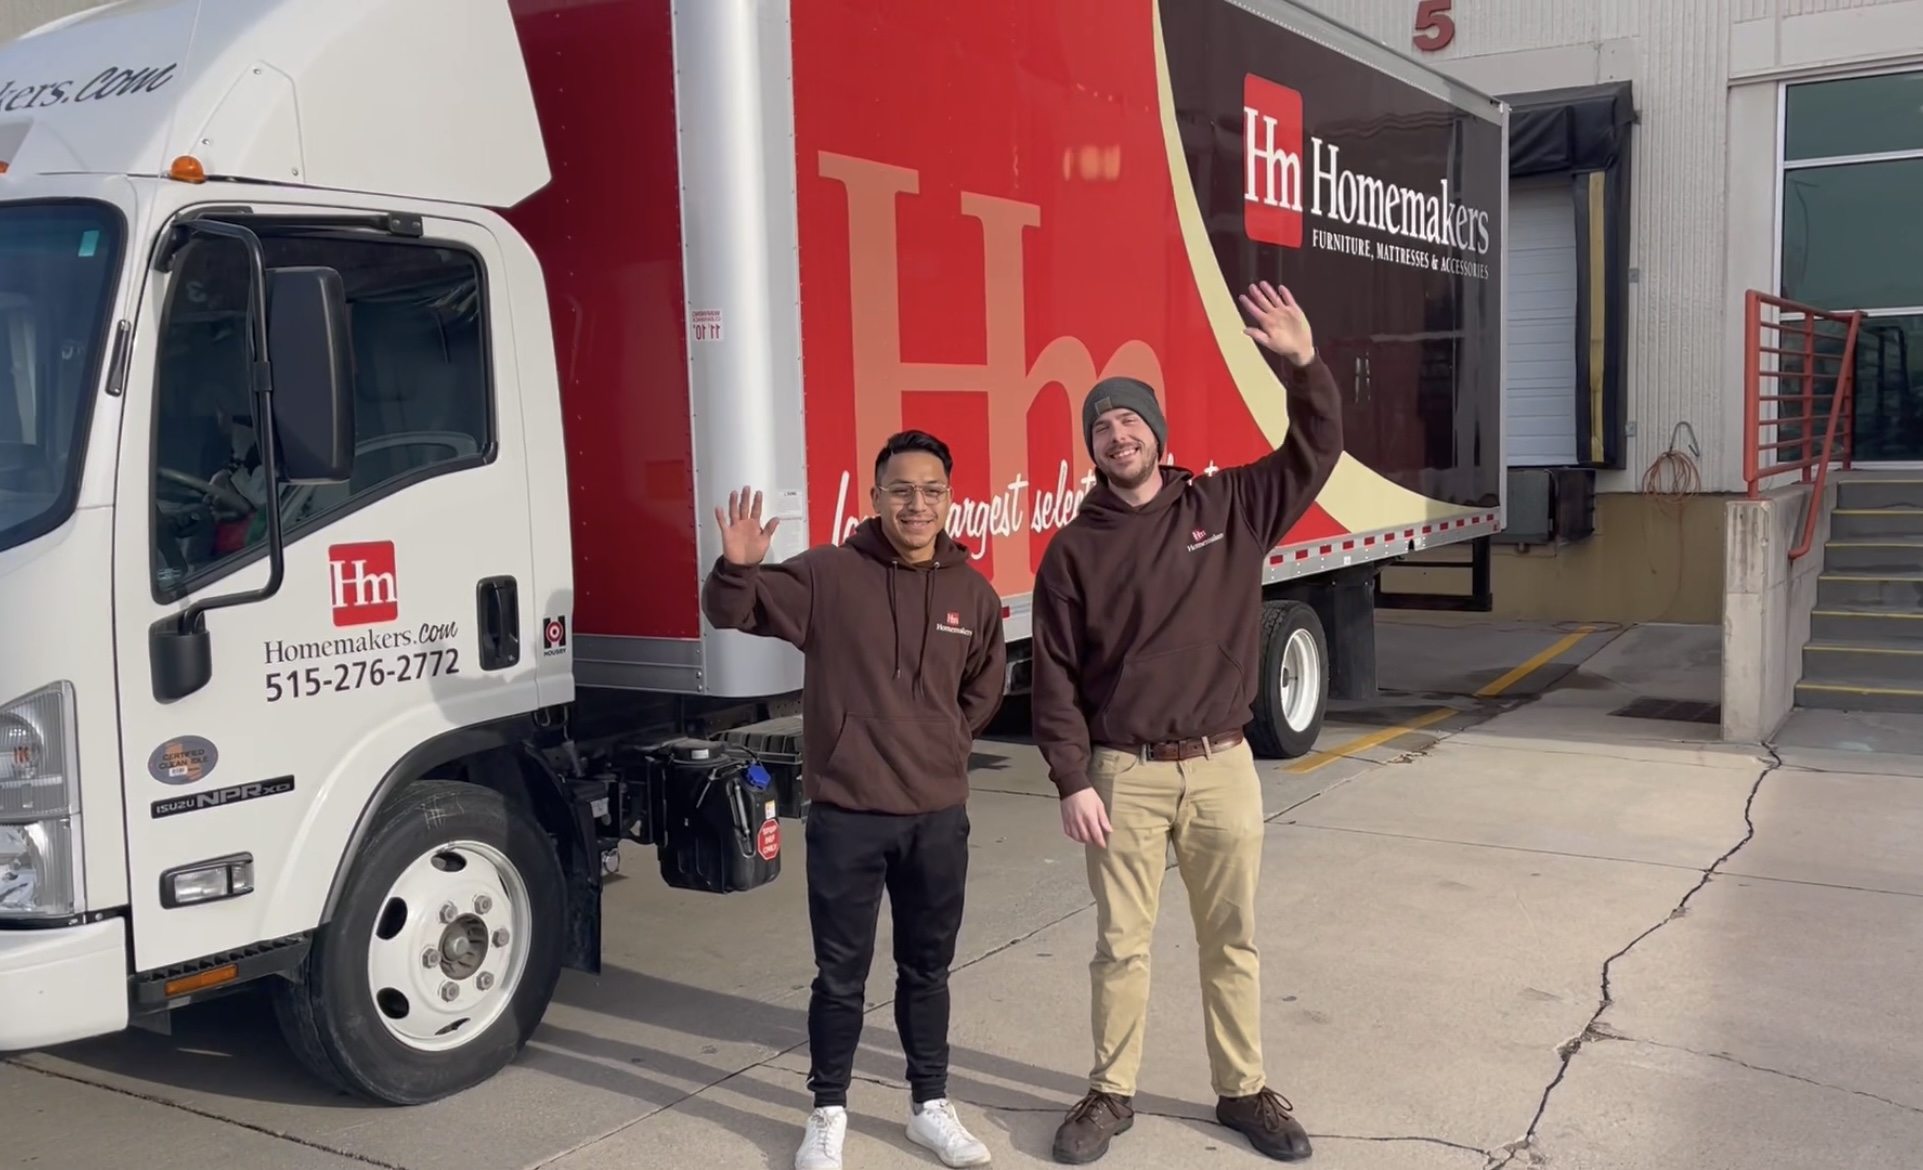 Delivery Drivers in front of a Homemakers Truck